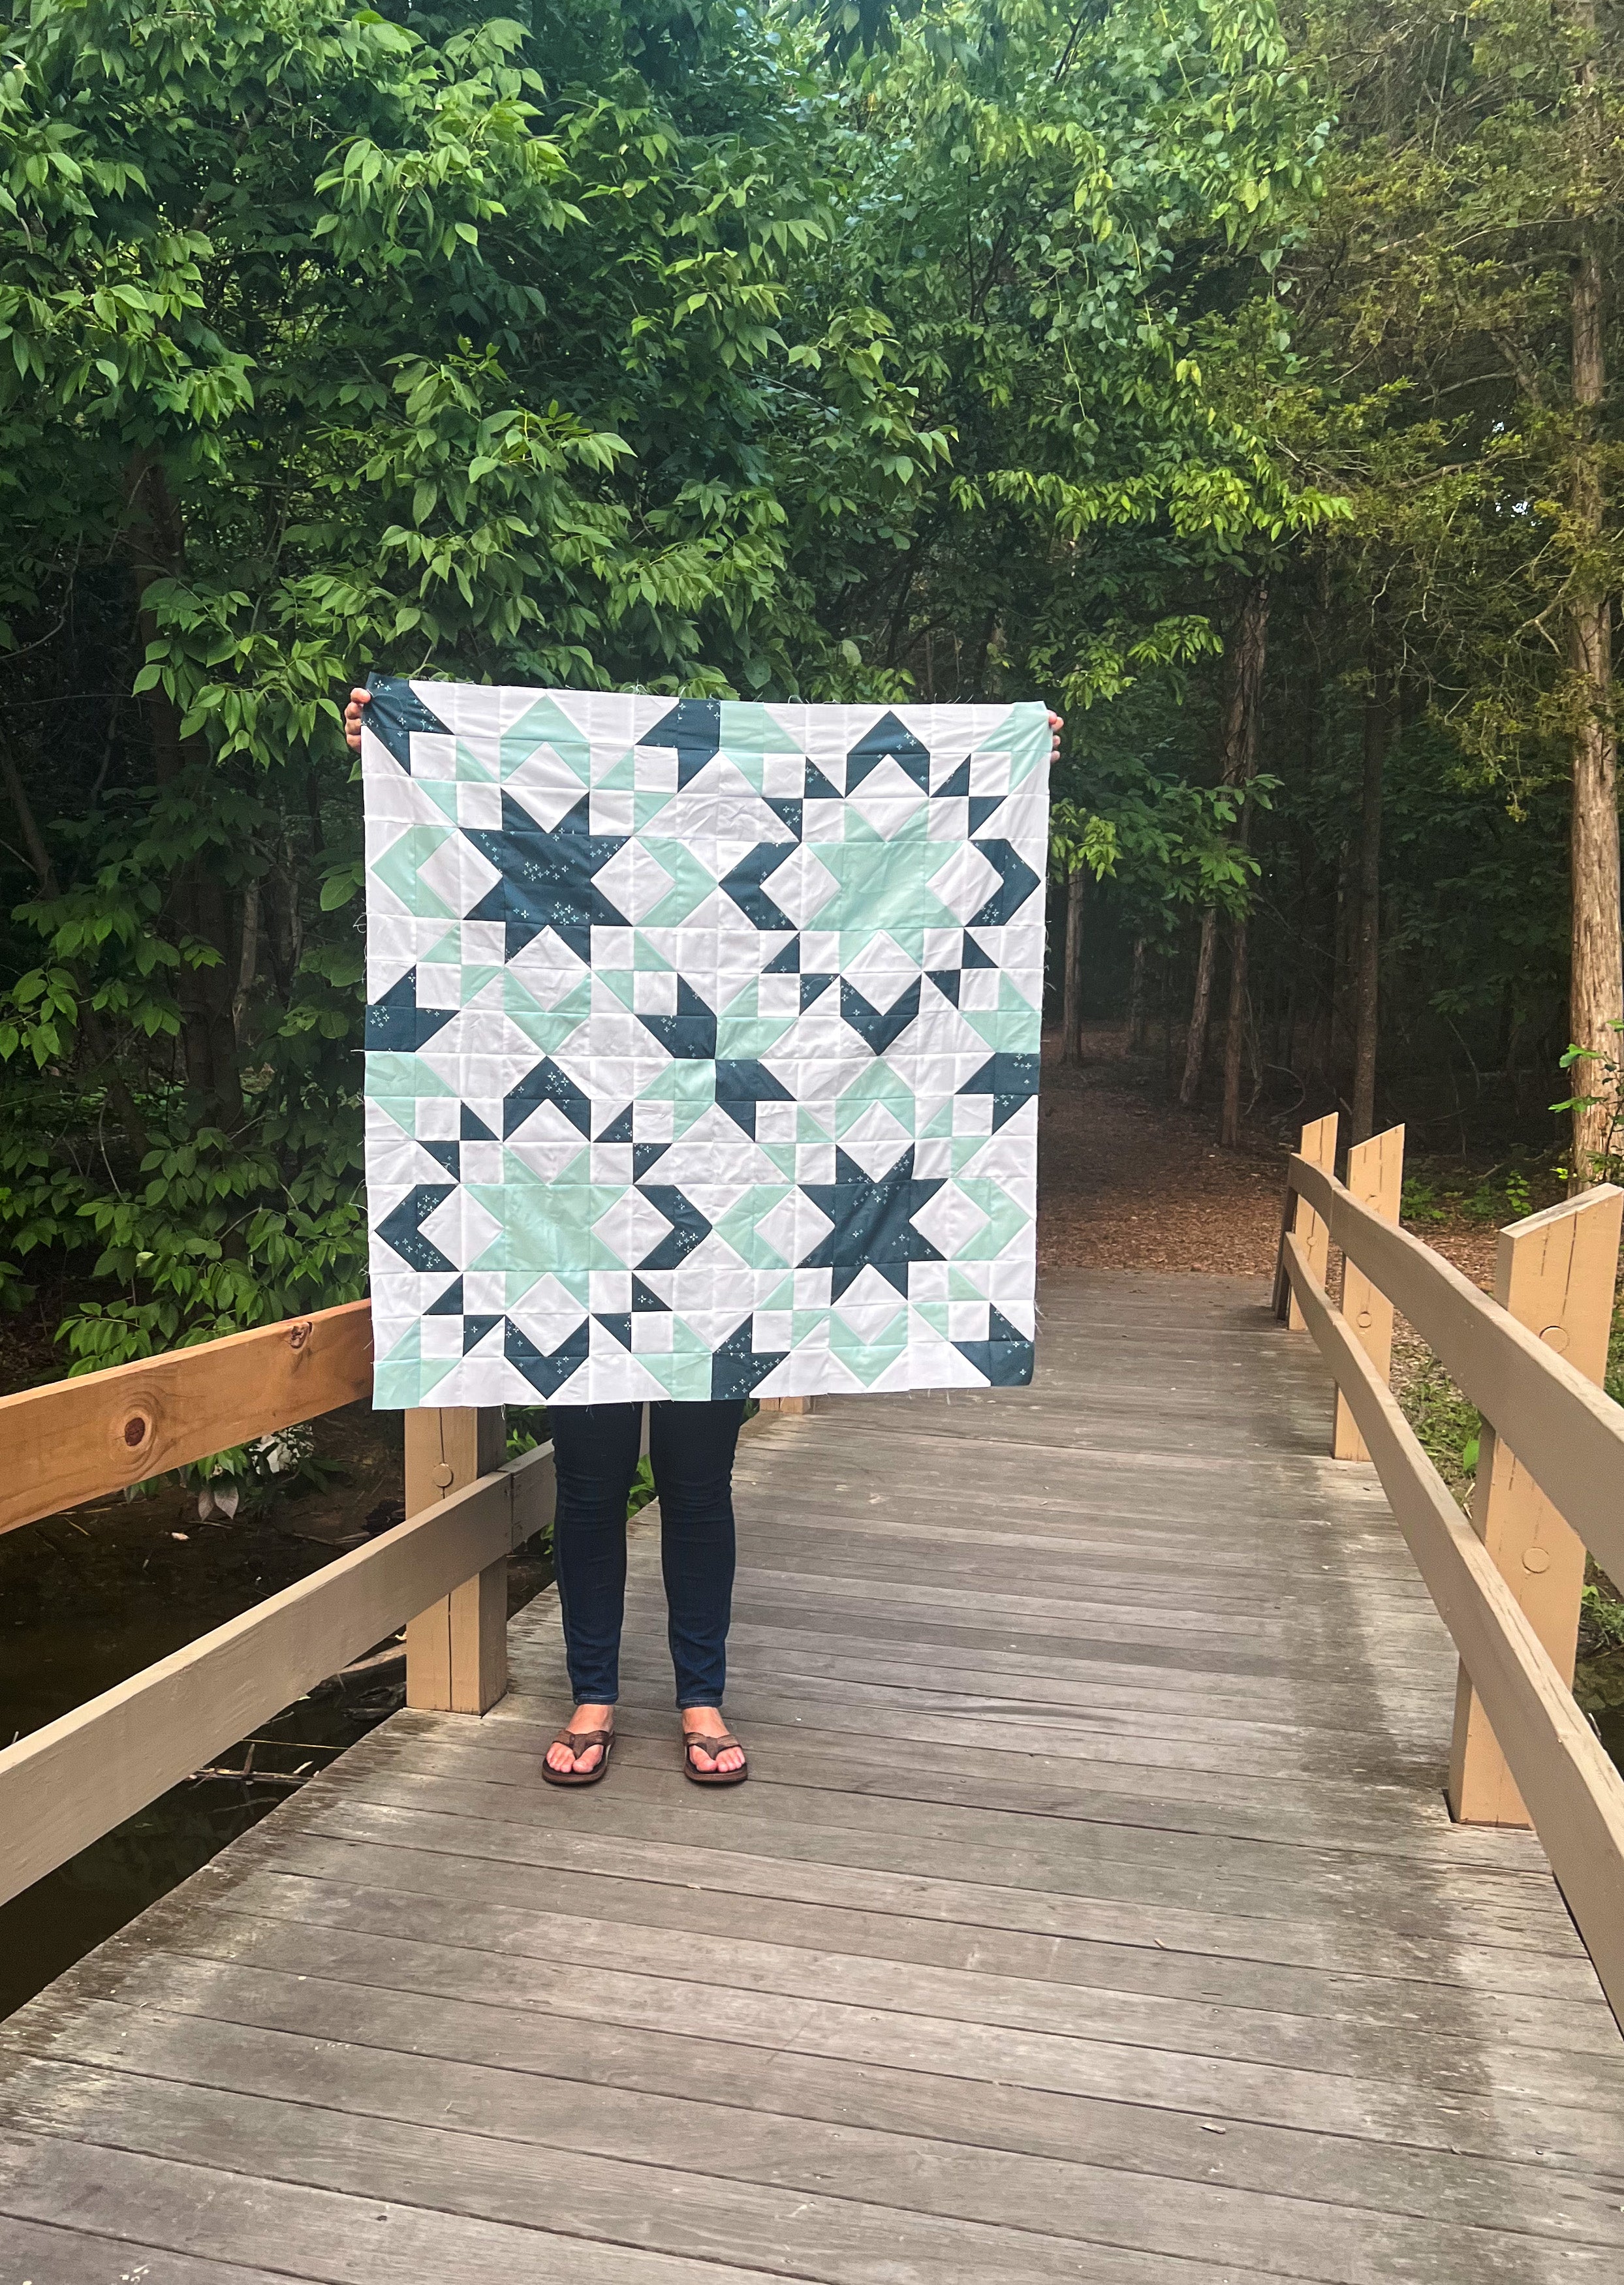 Starly Quilt made by Jessica. A modern but classic sawtooth star block quilt pattern by Cotton and Joy.